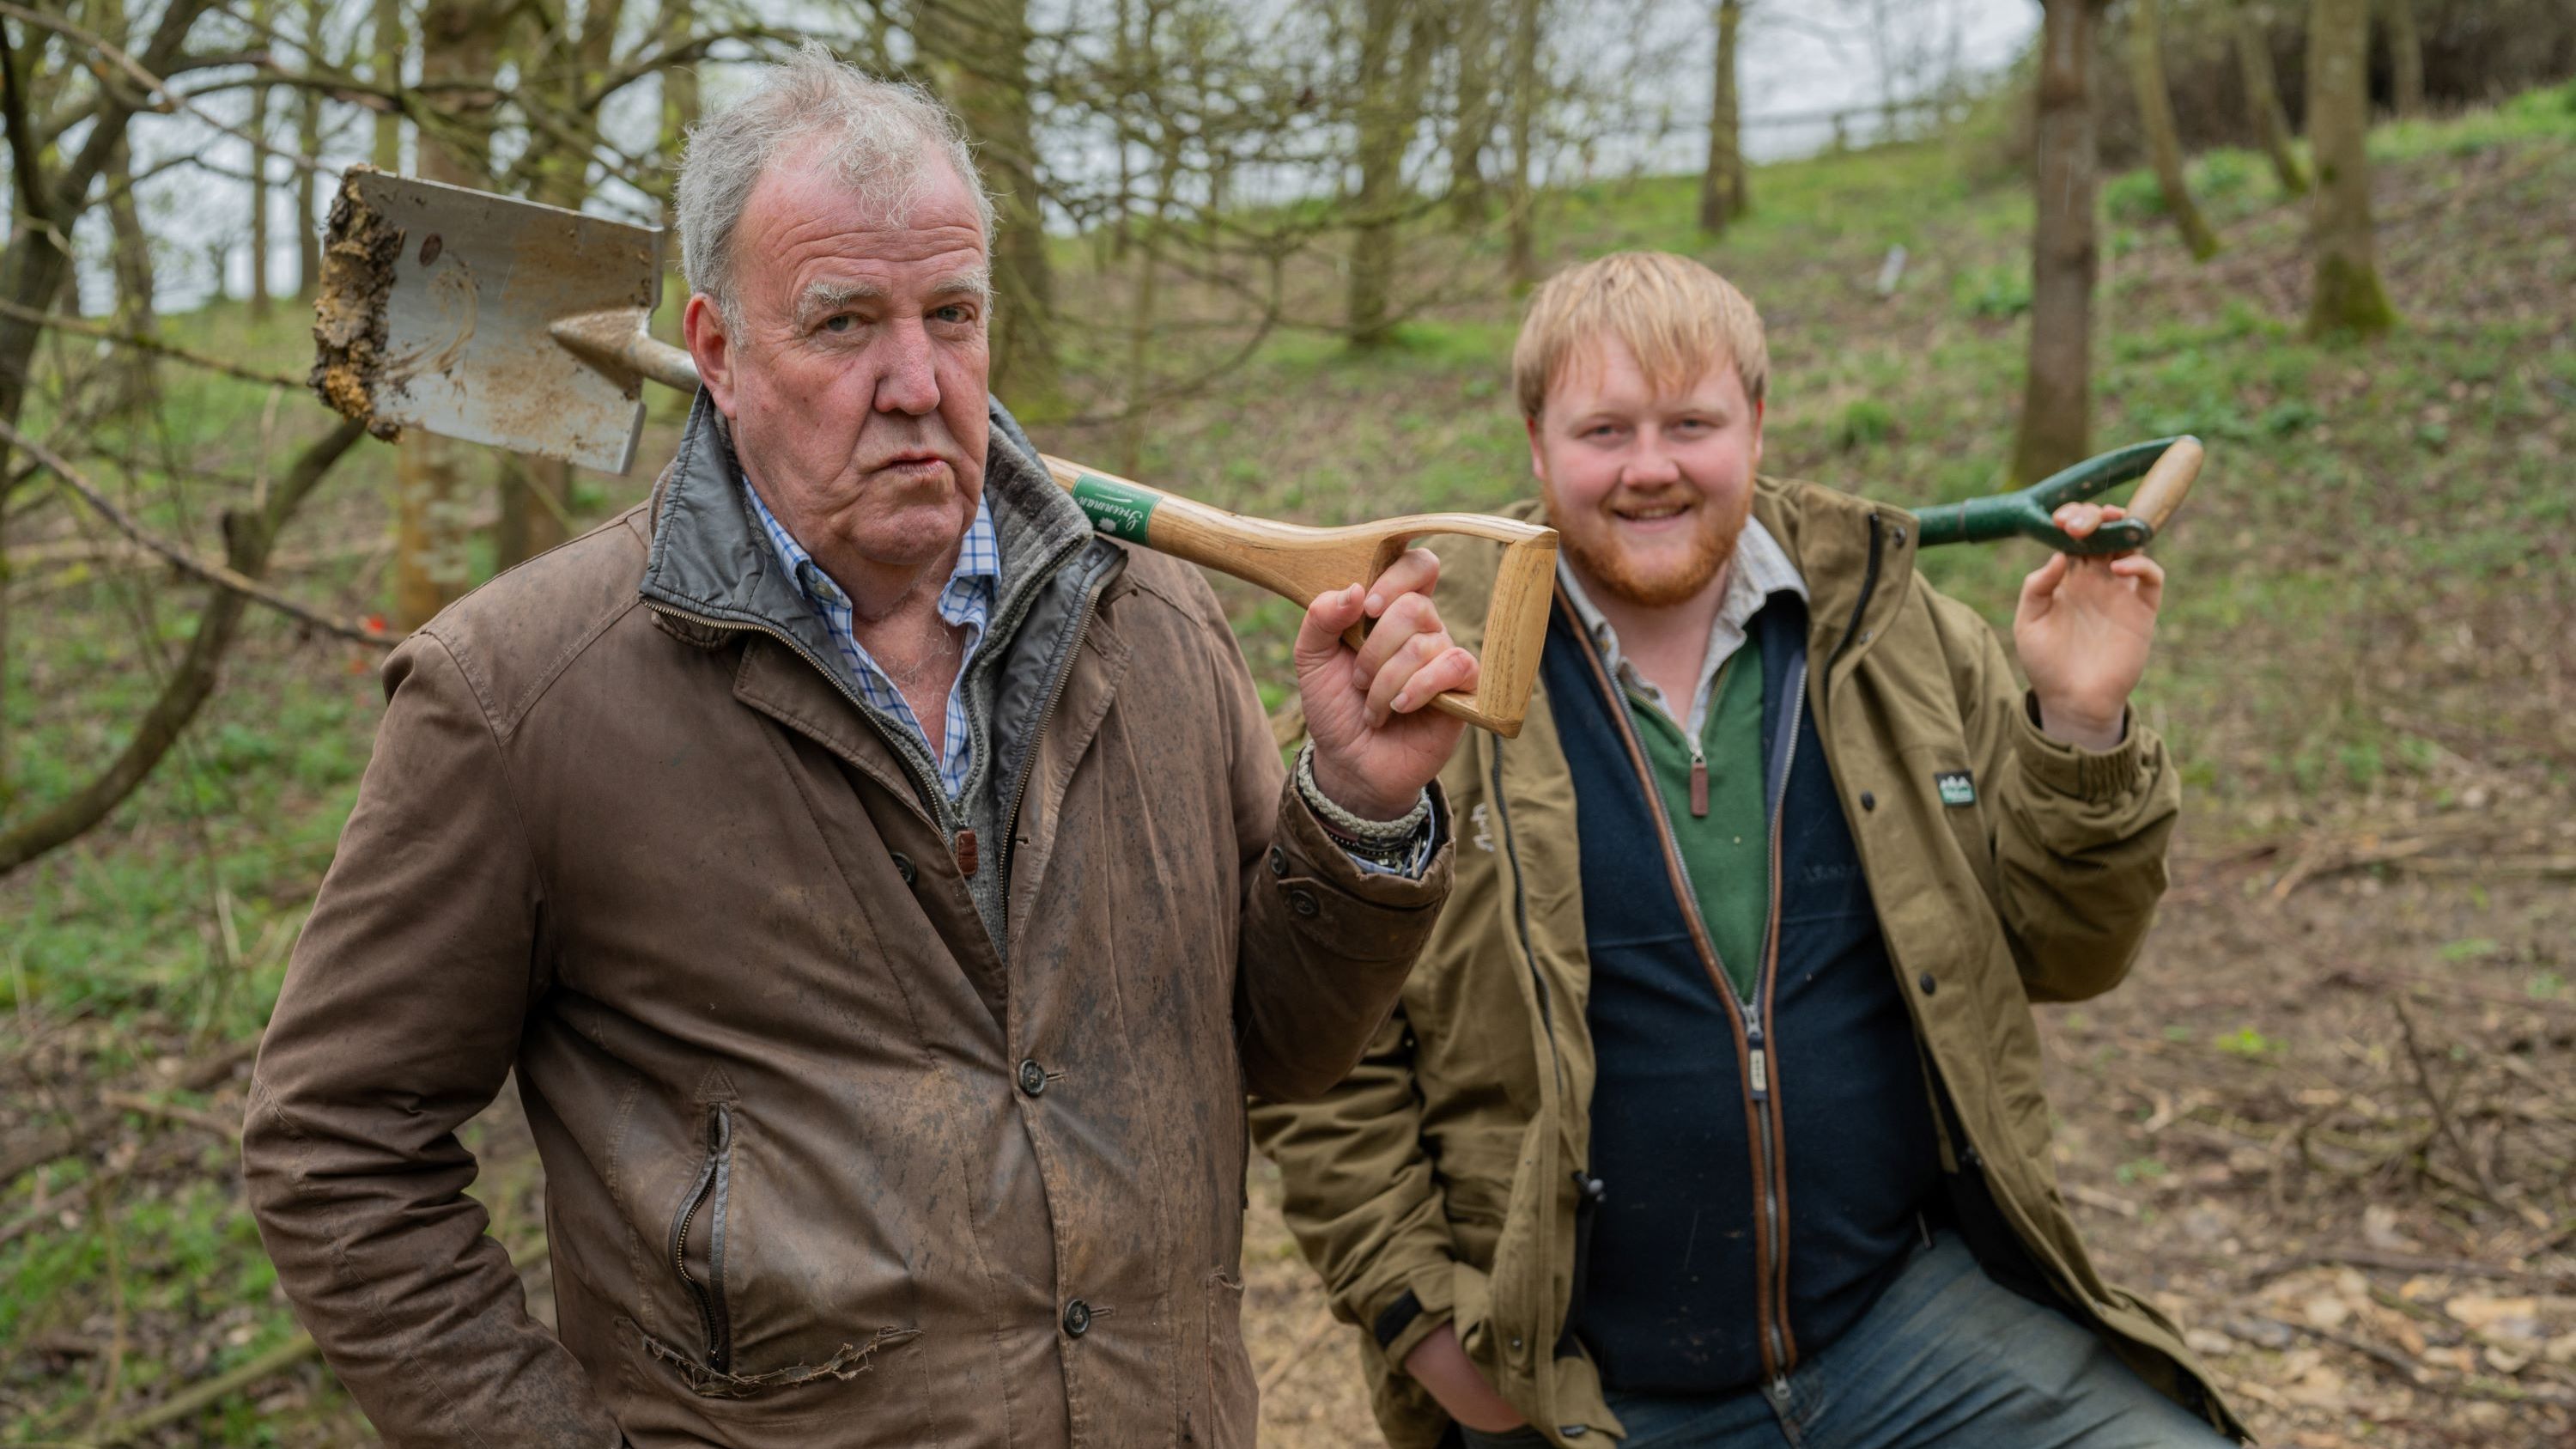 What to watch on TV this week: Clarkson’s Farm, Red Eye and more